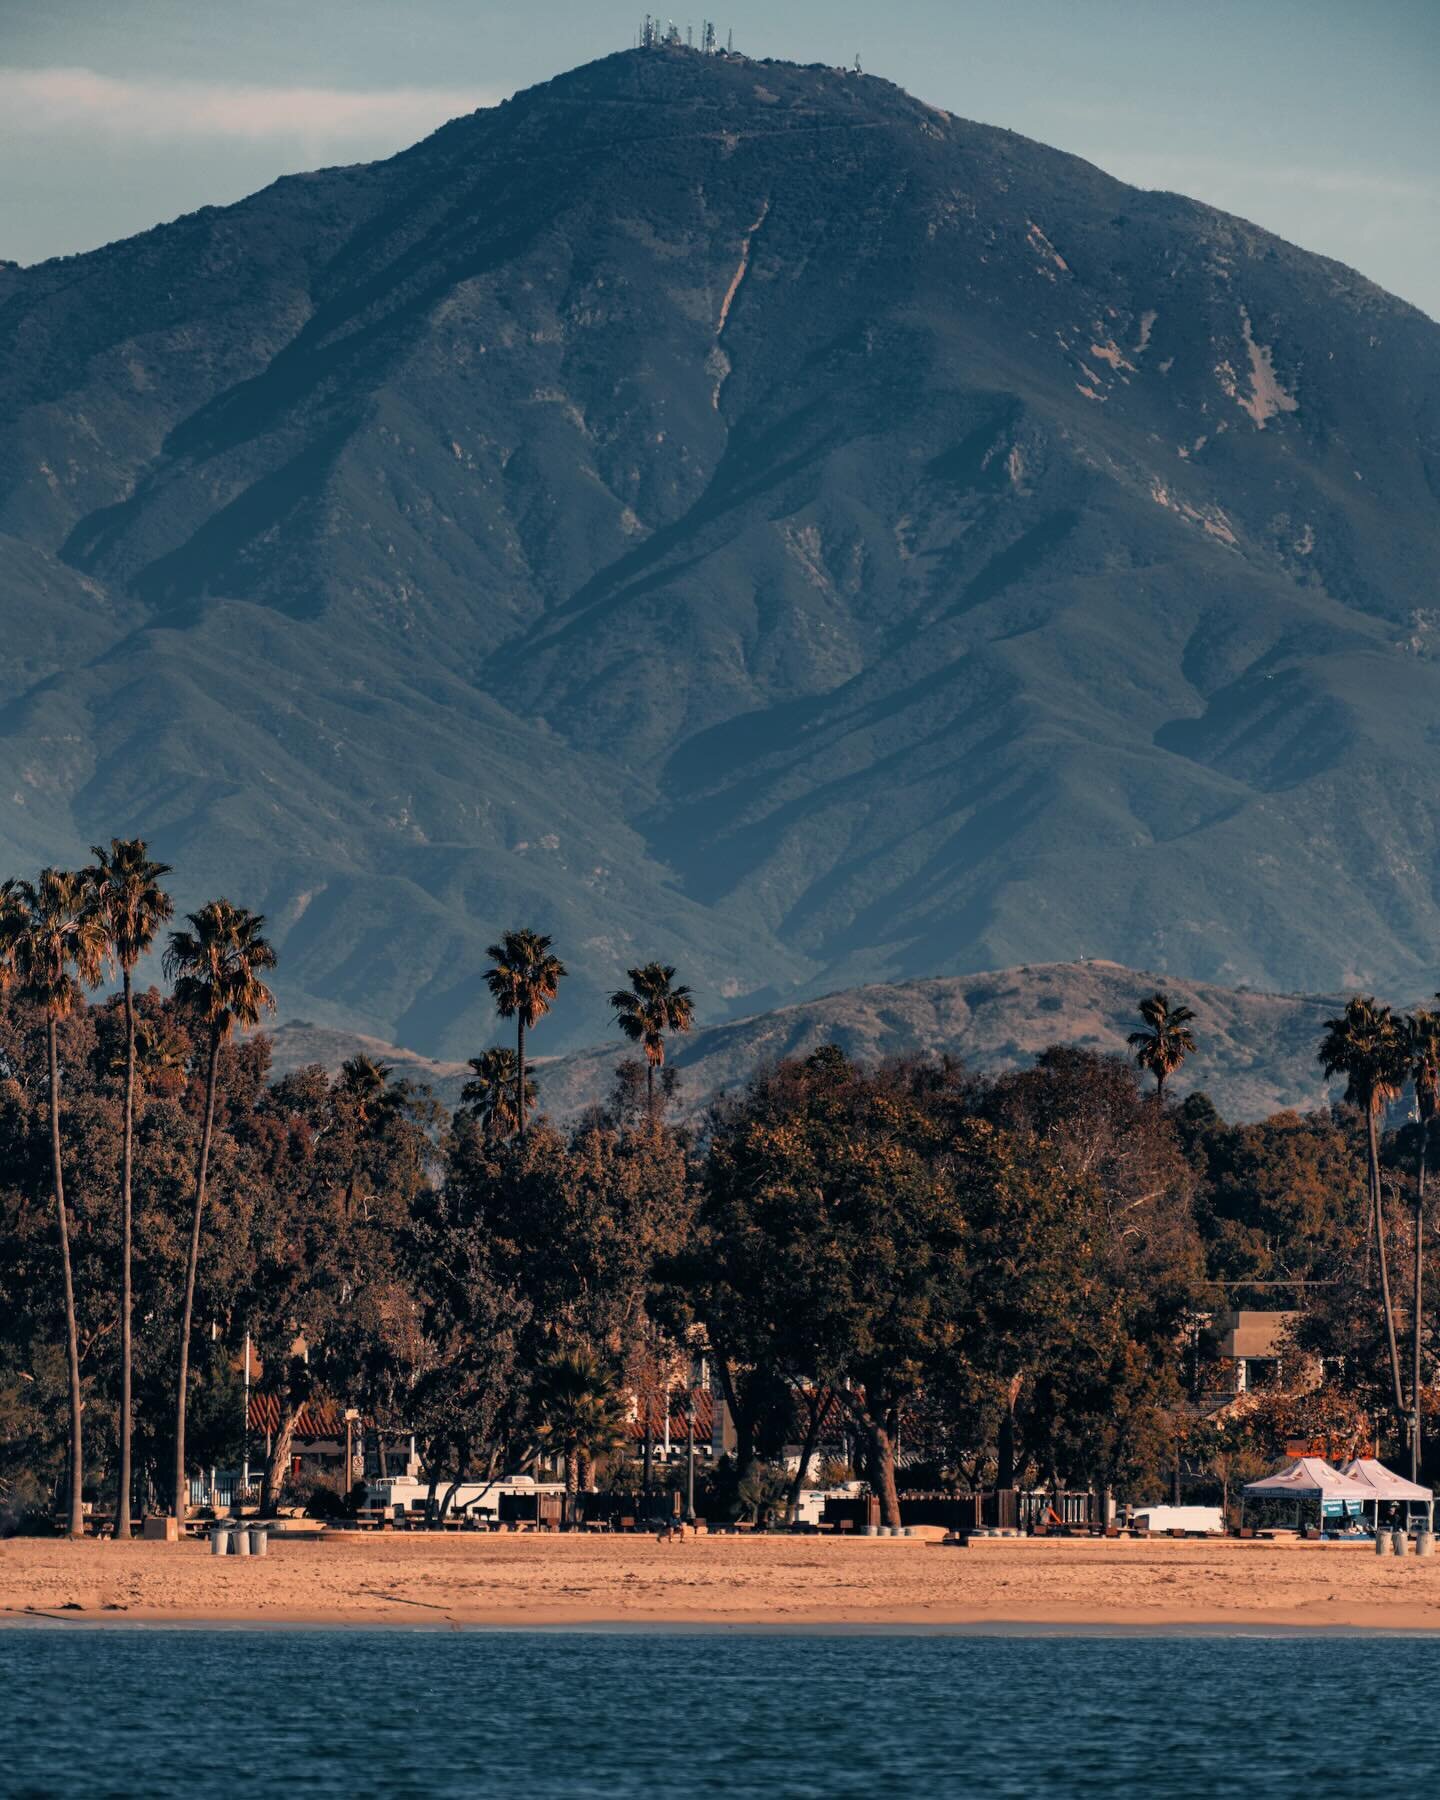 Doheny Beach with Santiago Peak looming 

#danapoint #santiagopeak #orangecounty #normhuttonphotography #normhutton